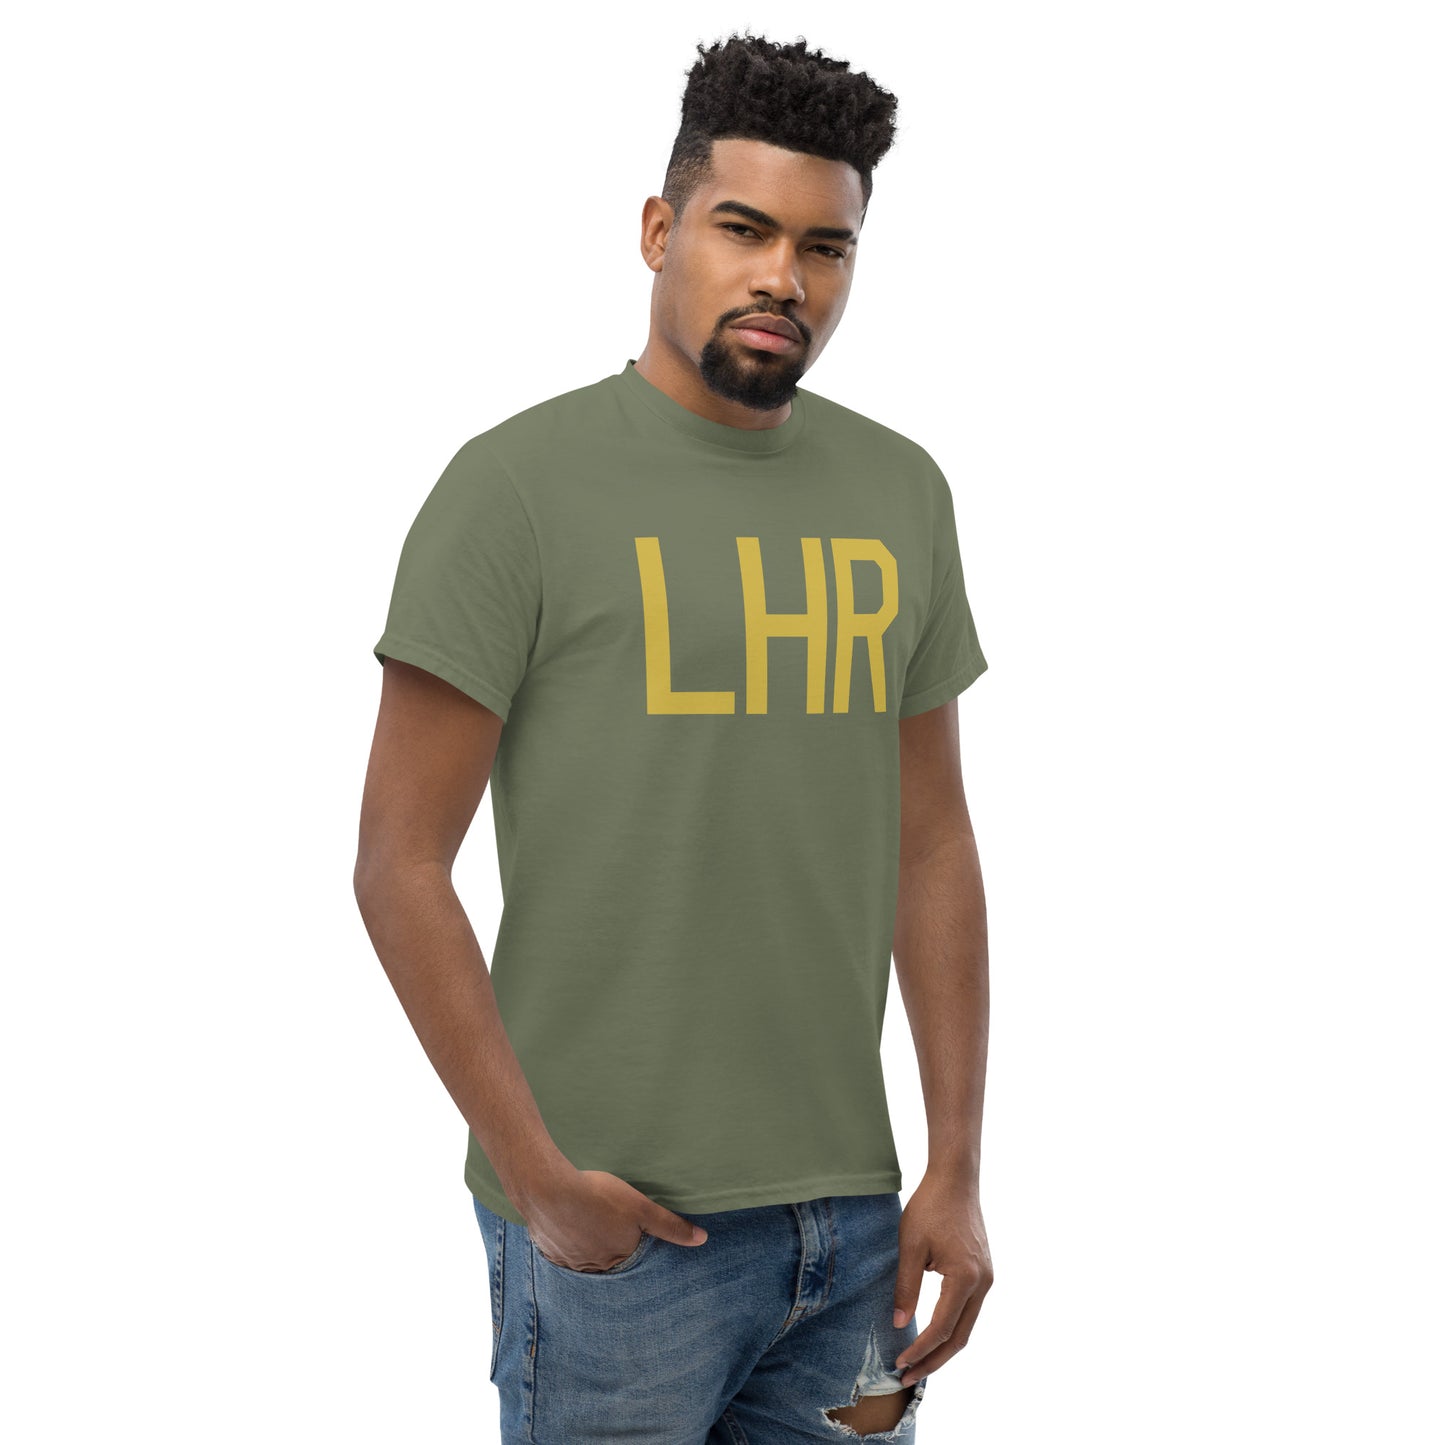 Aviation Enthusiast Men's Tee - Old Gold Graphic • LHR London • YHM Designs - Image 08